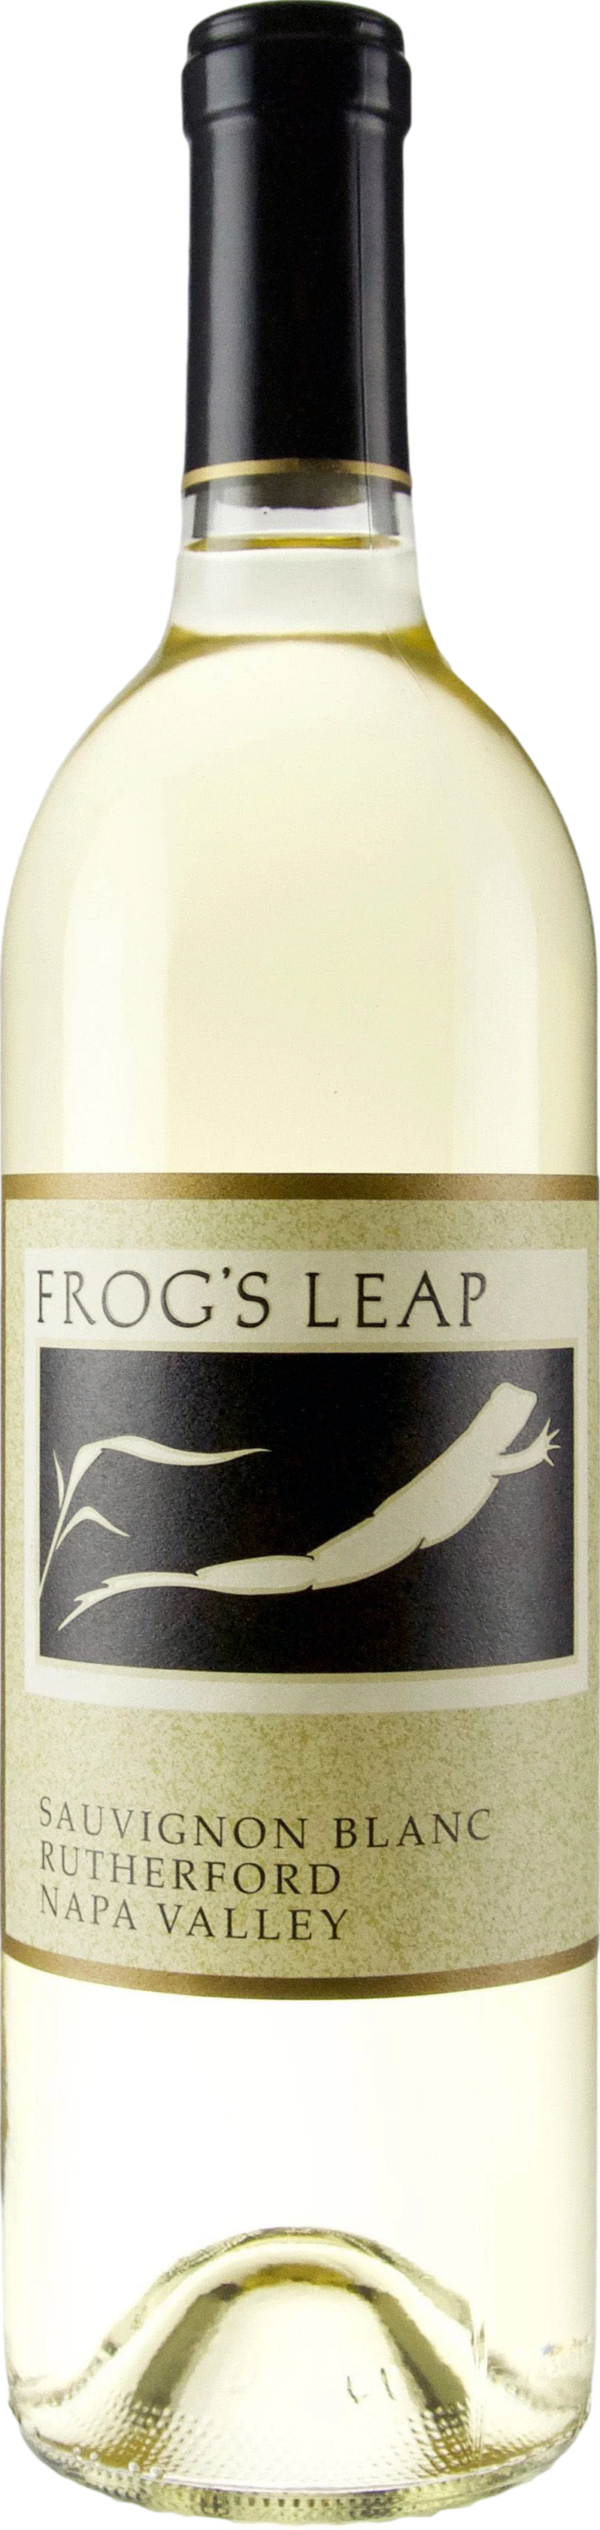 Product image of Frog's Leap Sauvignon Blanc 2019 from 8wines